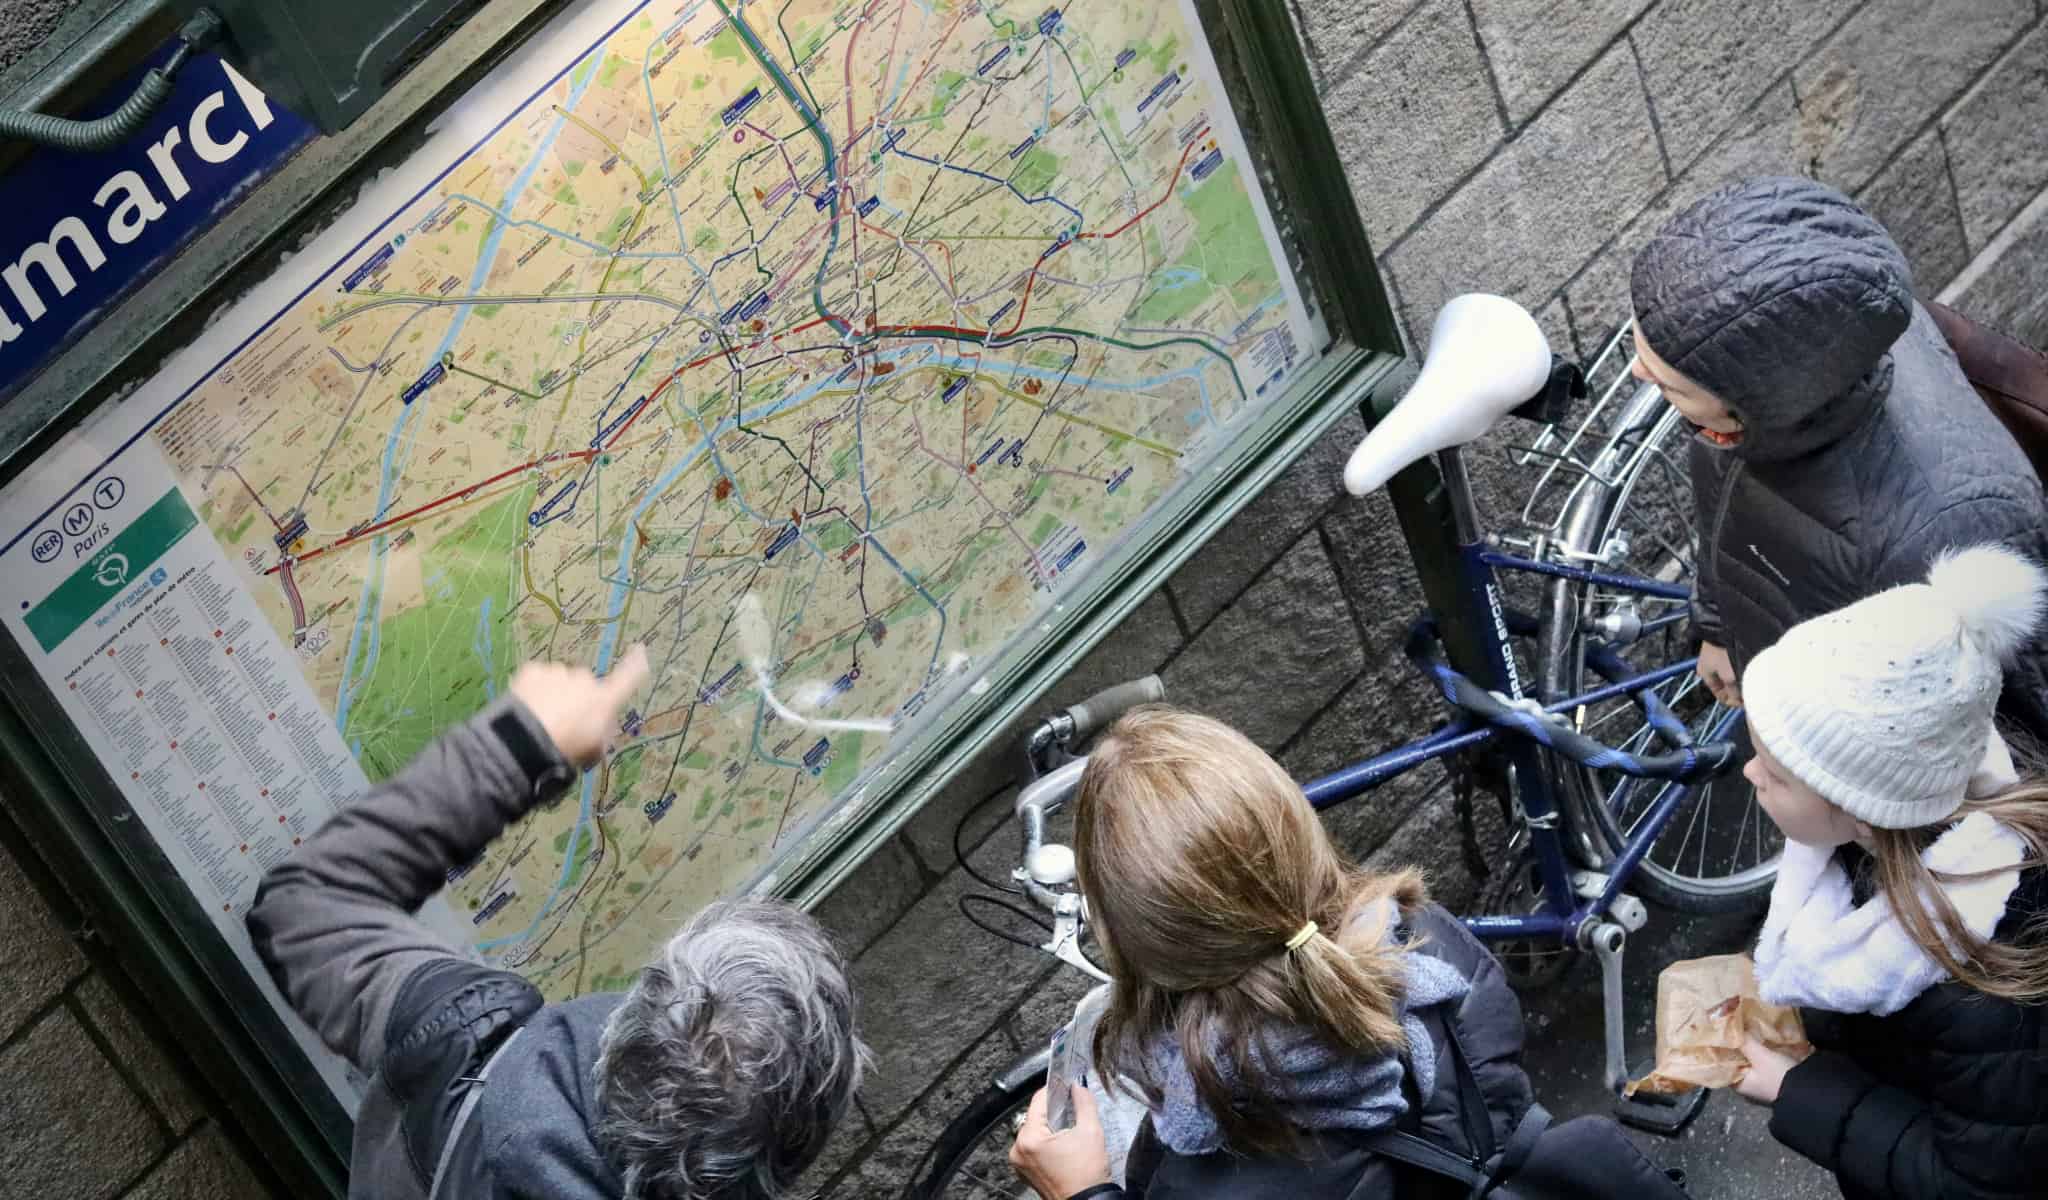 People looking at the map in front of a metro station in Paris